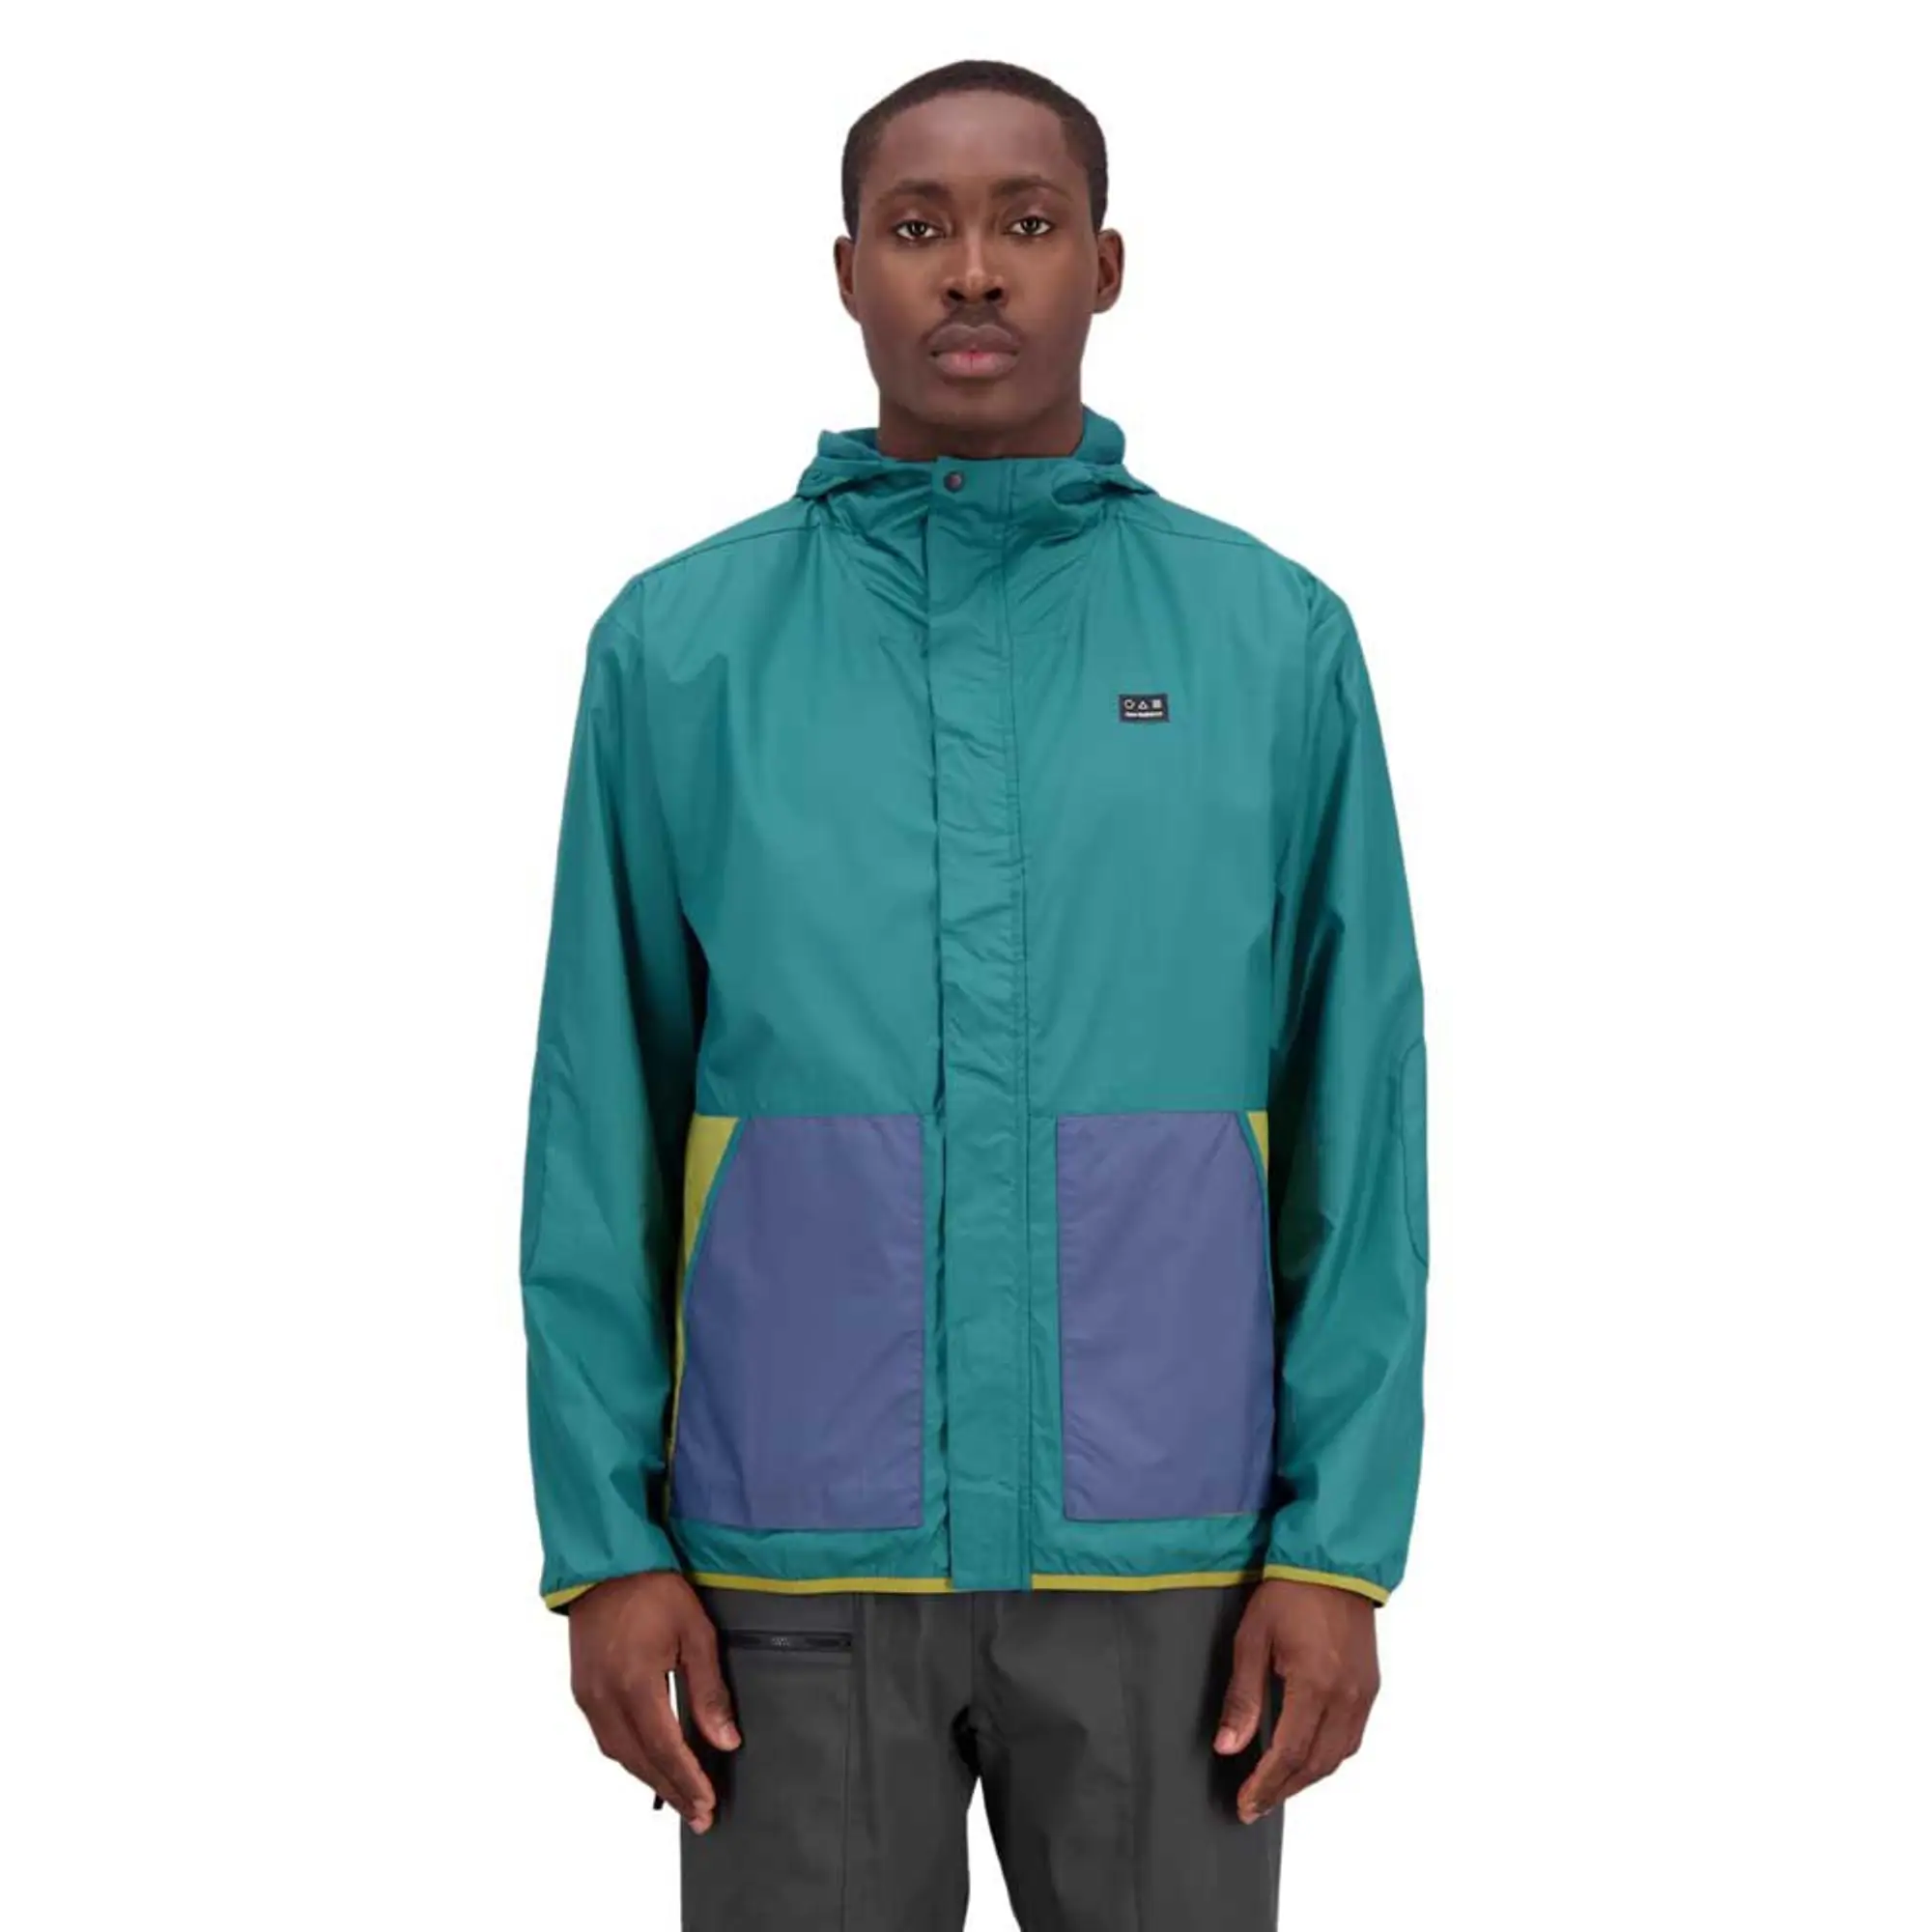 New Balance Men's AT Woven Jacket in Green/vert Polywoven